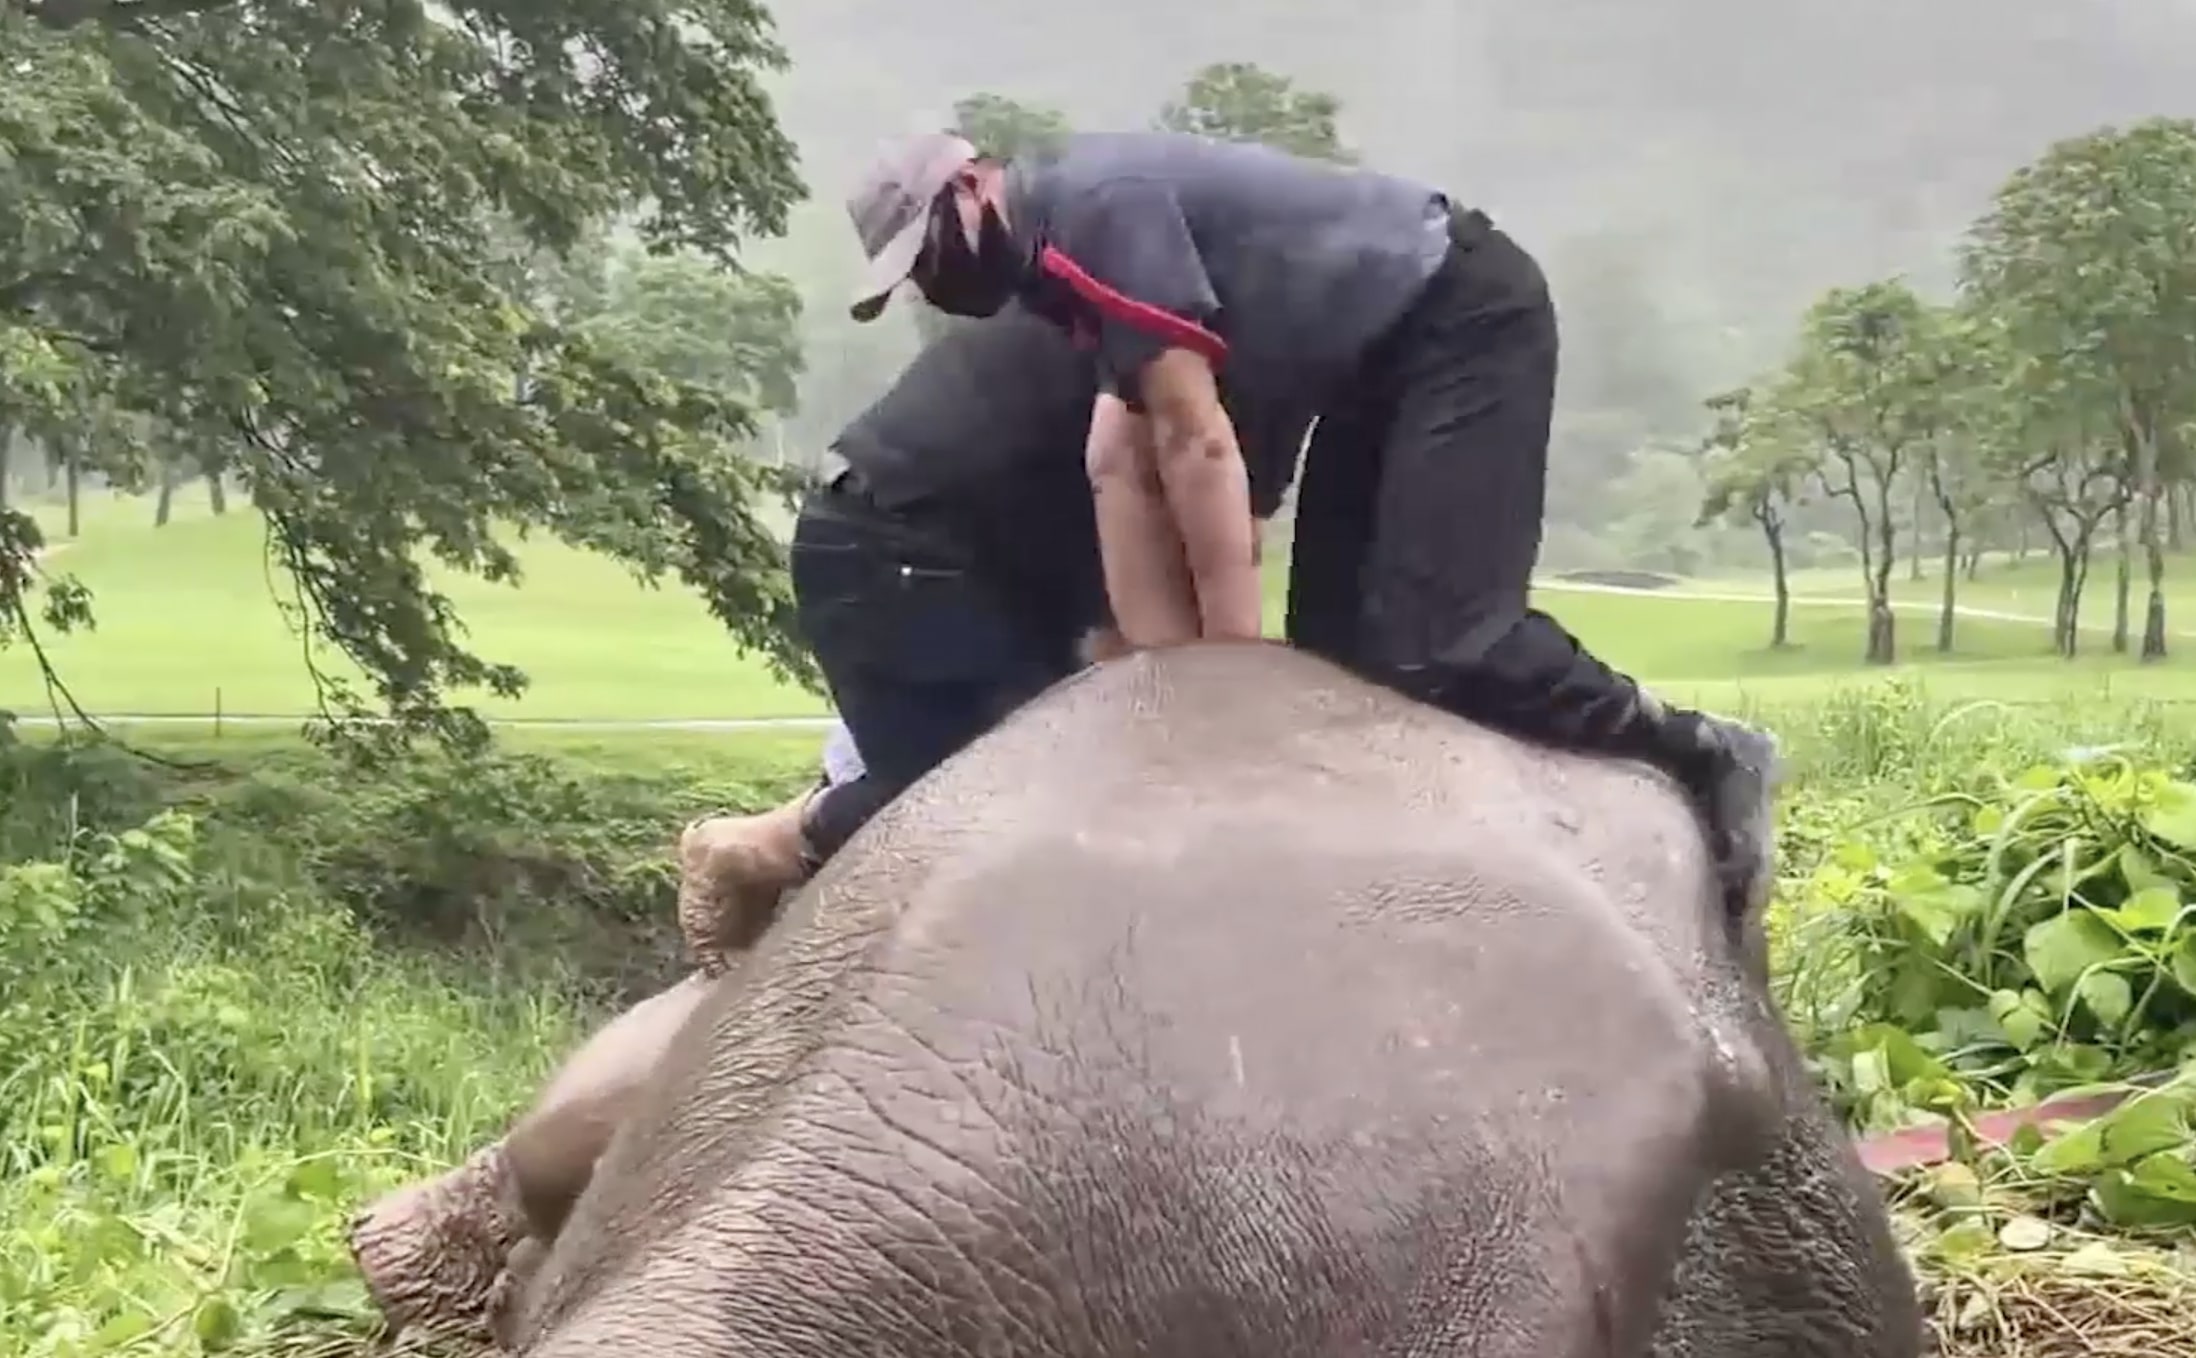 Mother Elephant Falls Into Drain While Protecting Calf, But Park Rangers  Use Crane to Rescue Her, Perform CPR | The Epoch Times